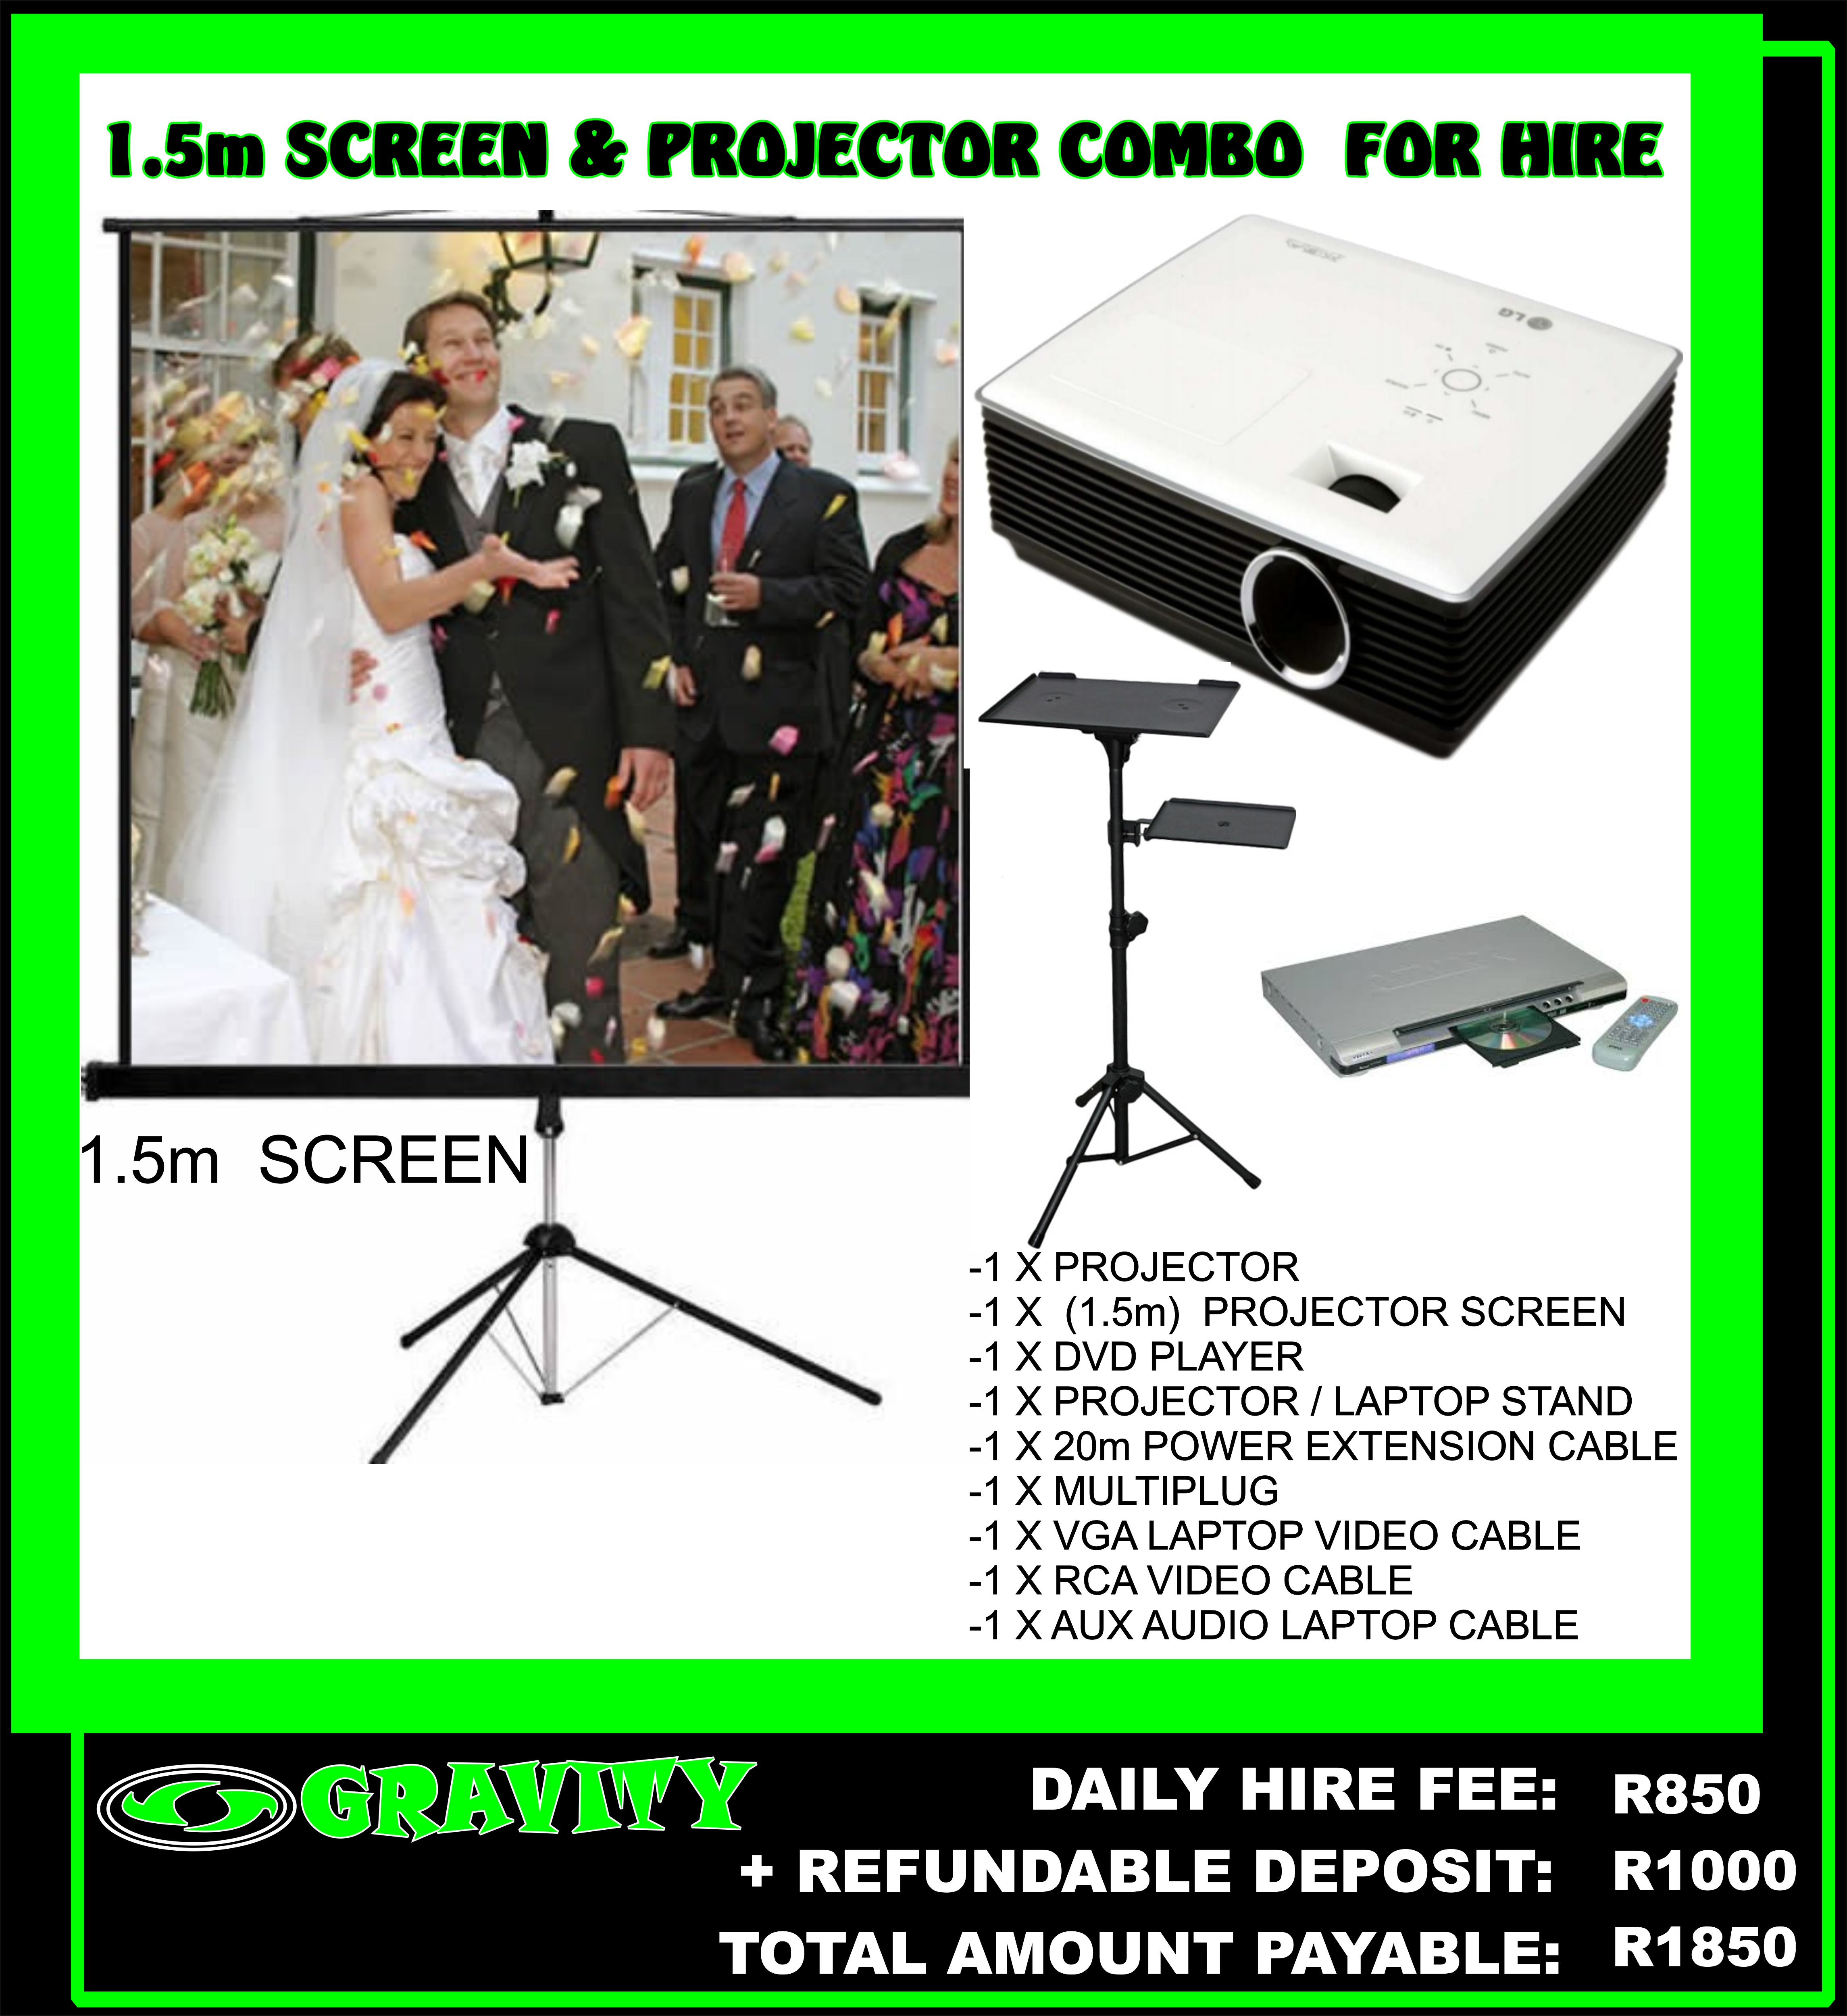 PROJECTOR AND 1.5m SCREEN FOR HIRE IN DURBAN IDEAL FOR A SLIDE SHOW FOR A WEDDING BIRTHDAY DEATH CEREMONY CONFERENCE SHOW EVENTS PROJECTS AND SCREEN DAY HIRE ONLY AT GRAVITY SOUND AND LIGHTING WAREHOUSE DURBAN 0315072736 PROJECTOR LAPTOP POWERPOINT PRESENTATIONS ONTO A BIG SCREEN NOW AVAILABLE AT GRAVITY DJ STORE ON A DAILY HIRE FEE 0315072463